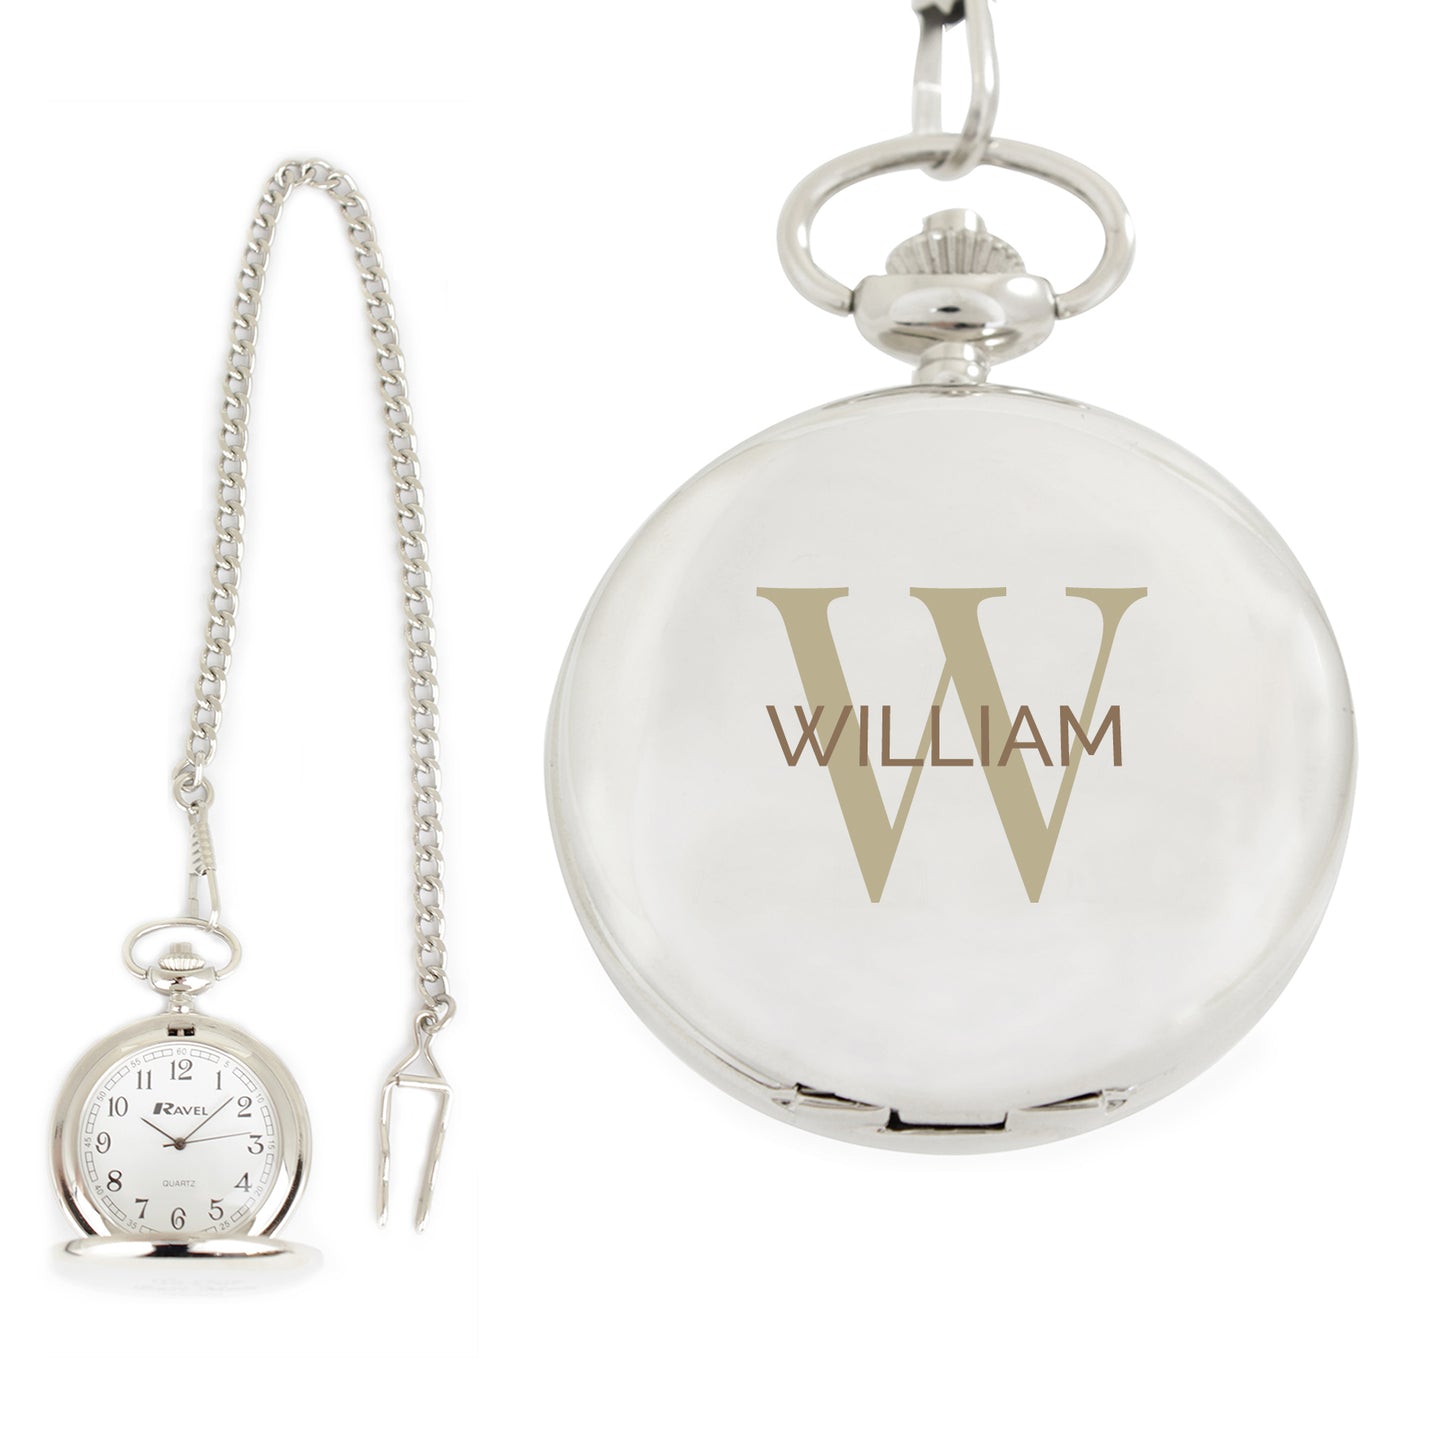 Personalised Birthday Big Age Pocket Fob Watch - Personalise It!